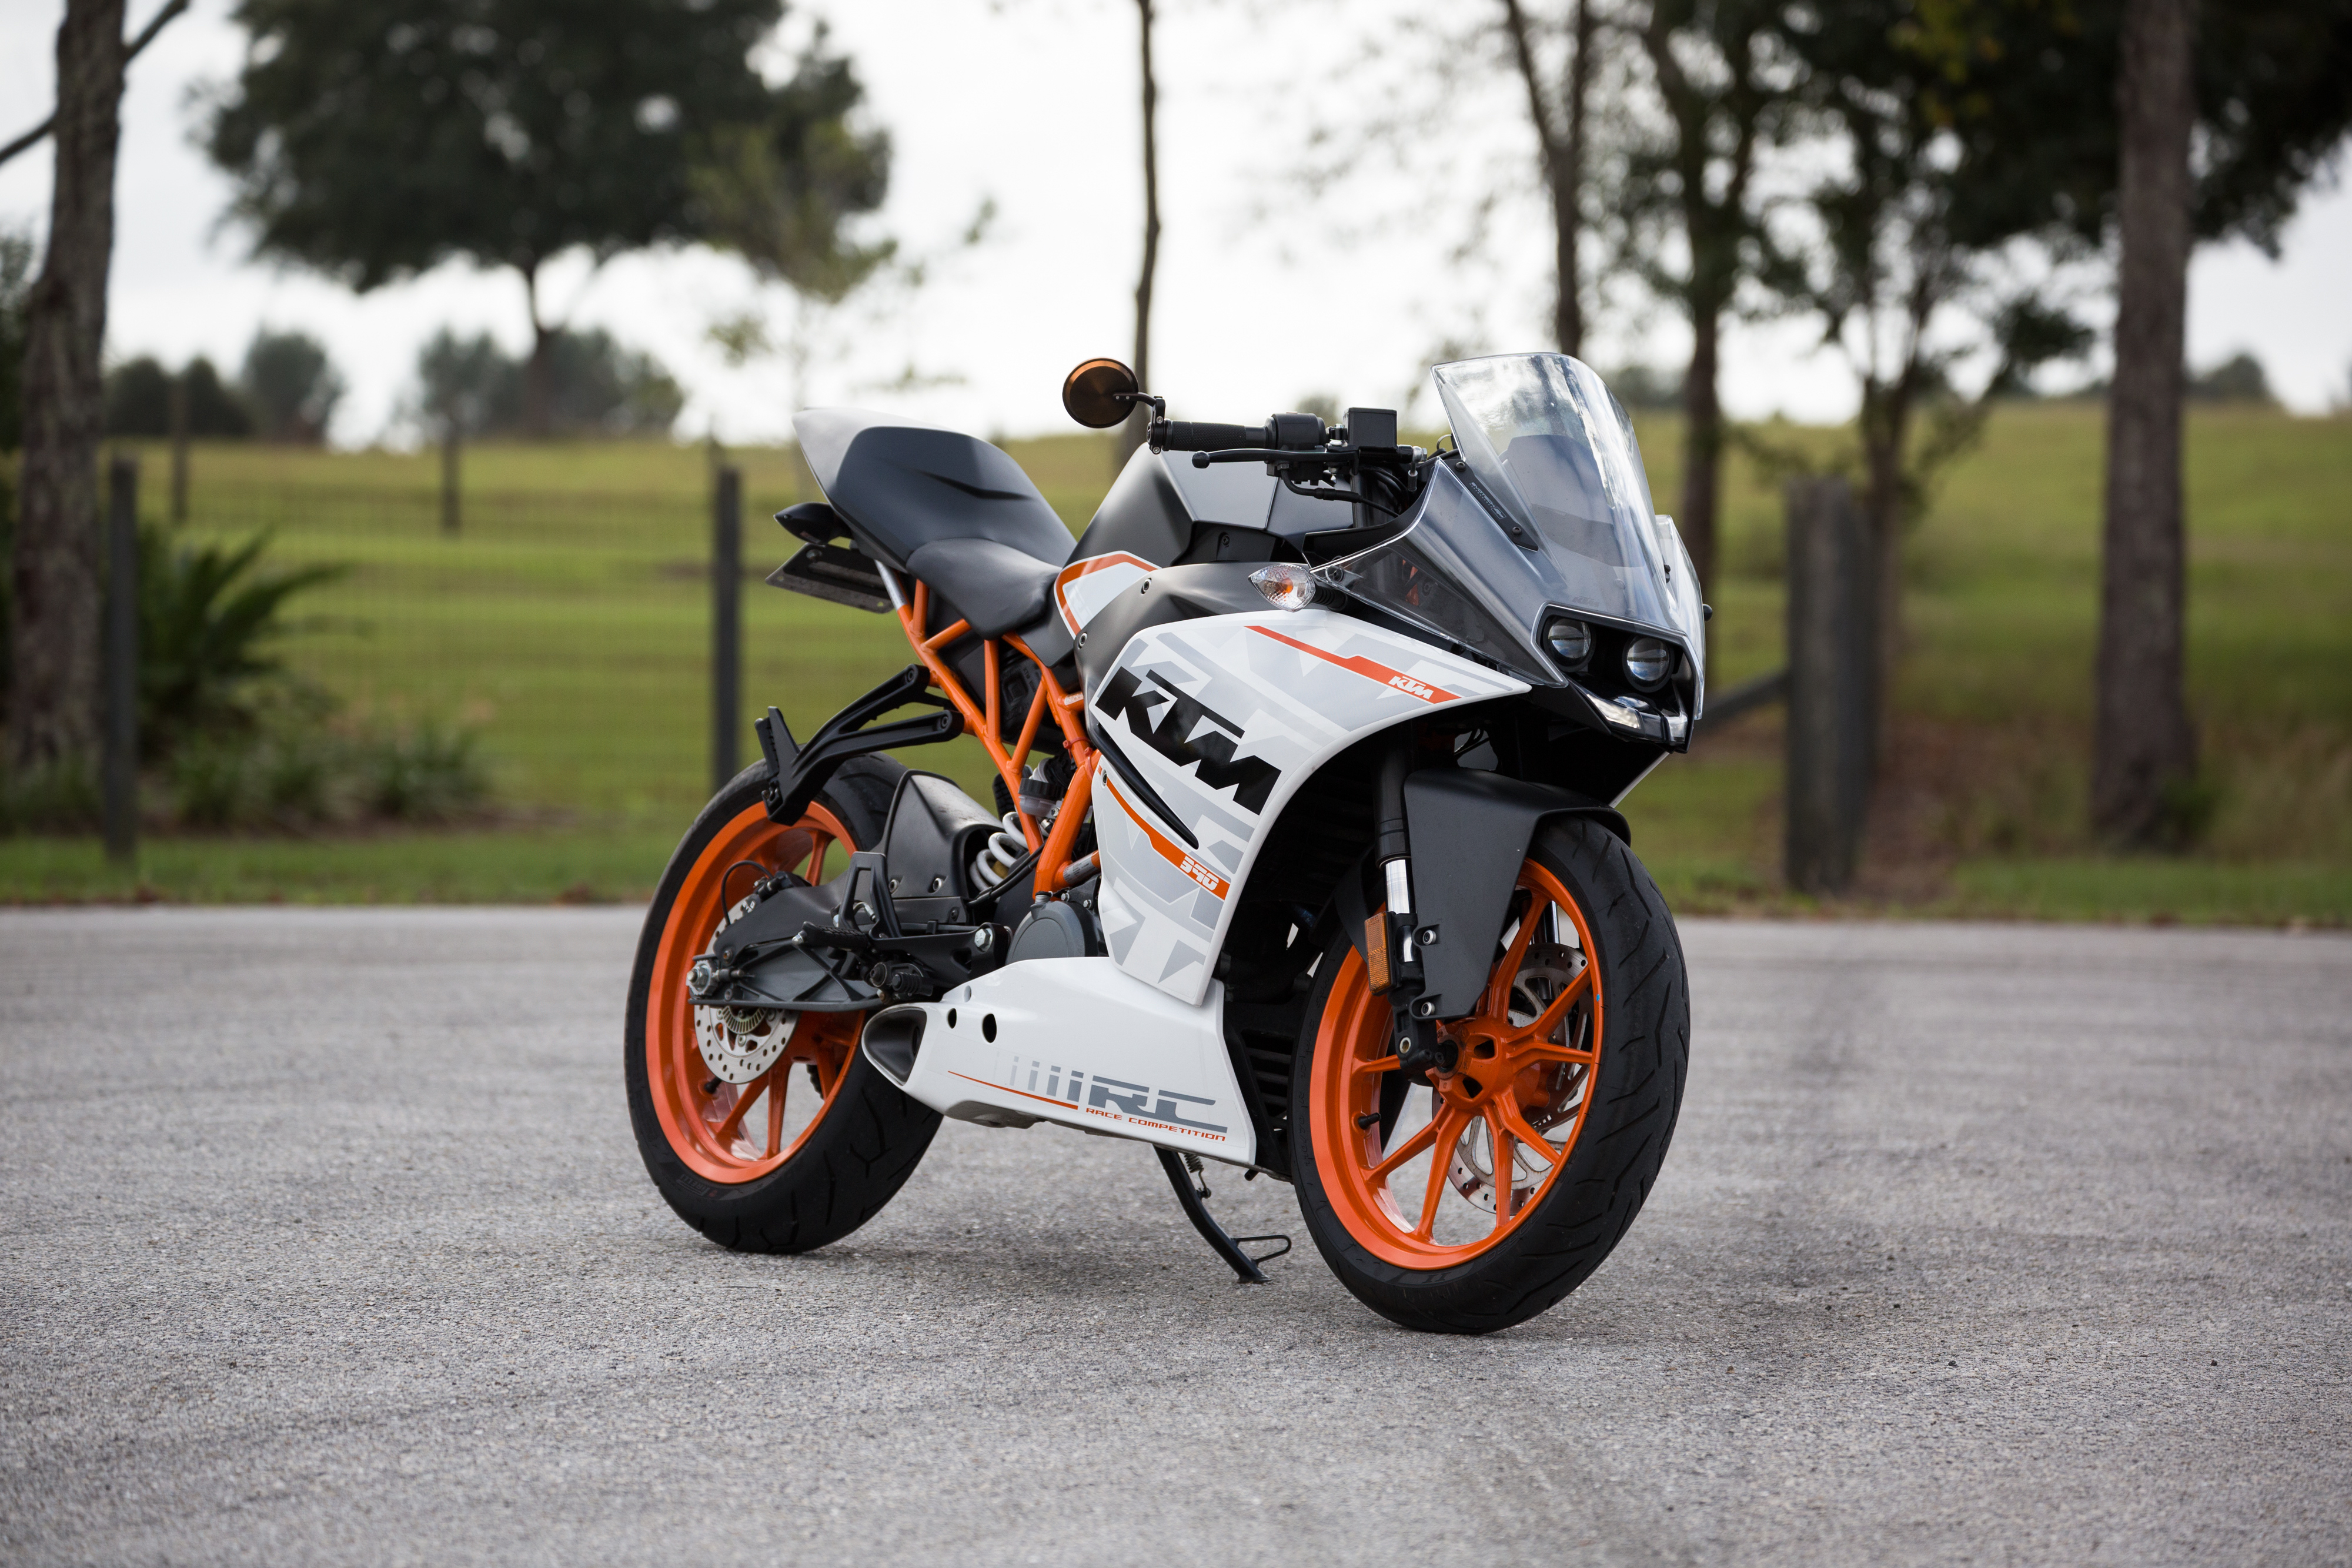 ktm, motorcycles, side view, motorcycle 1080p